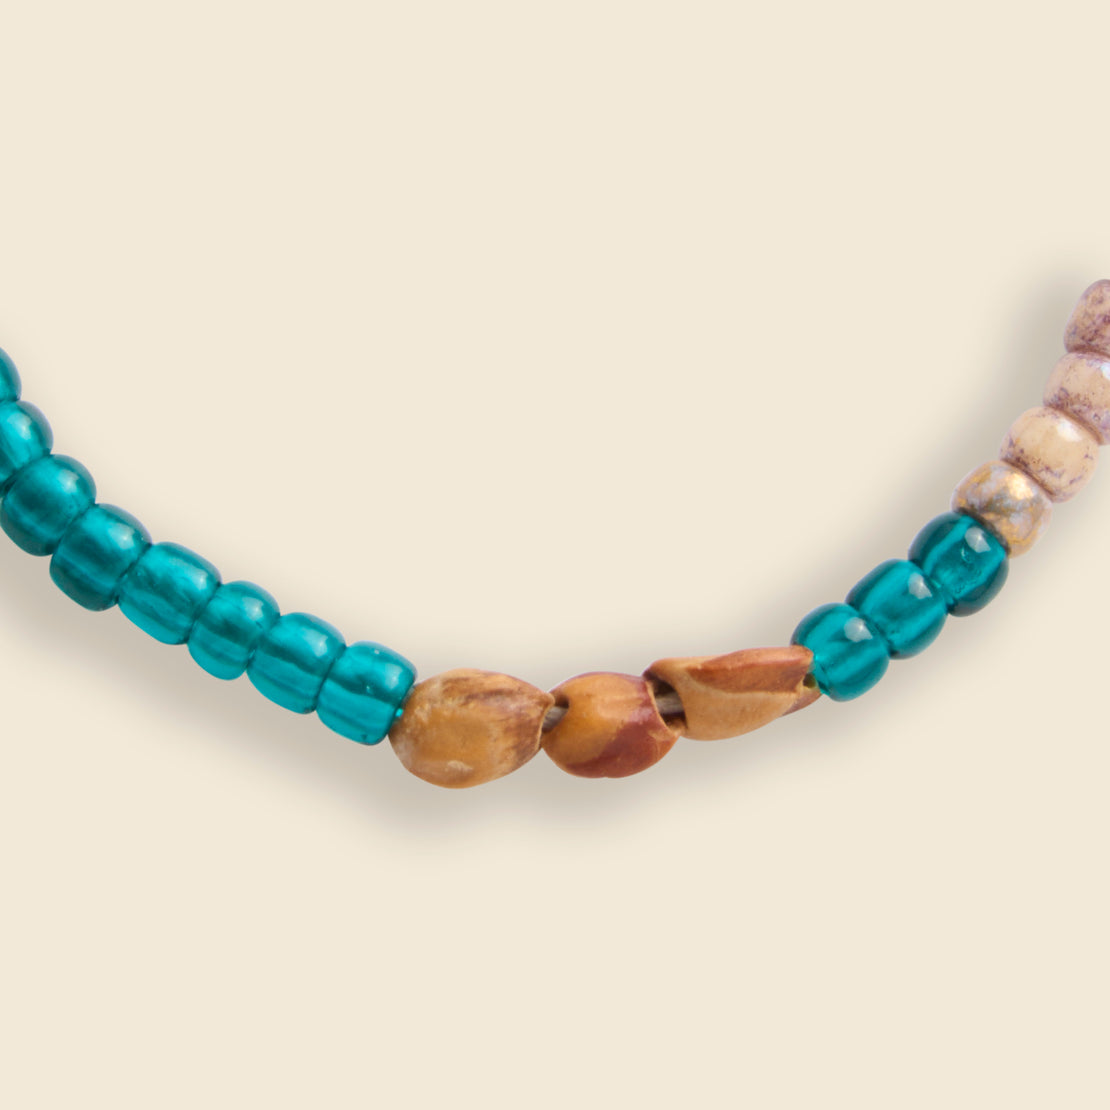 Cedar Bead Bracelet - Shonto - DINEH - STAG Provisions - W - Accessories - Necklace